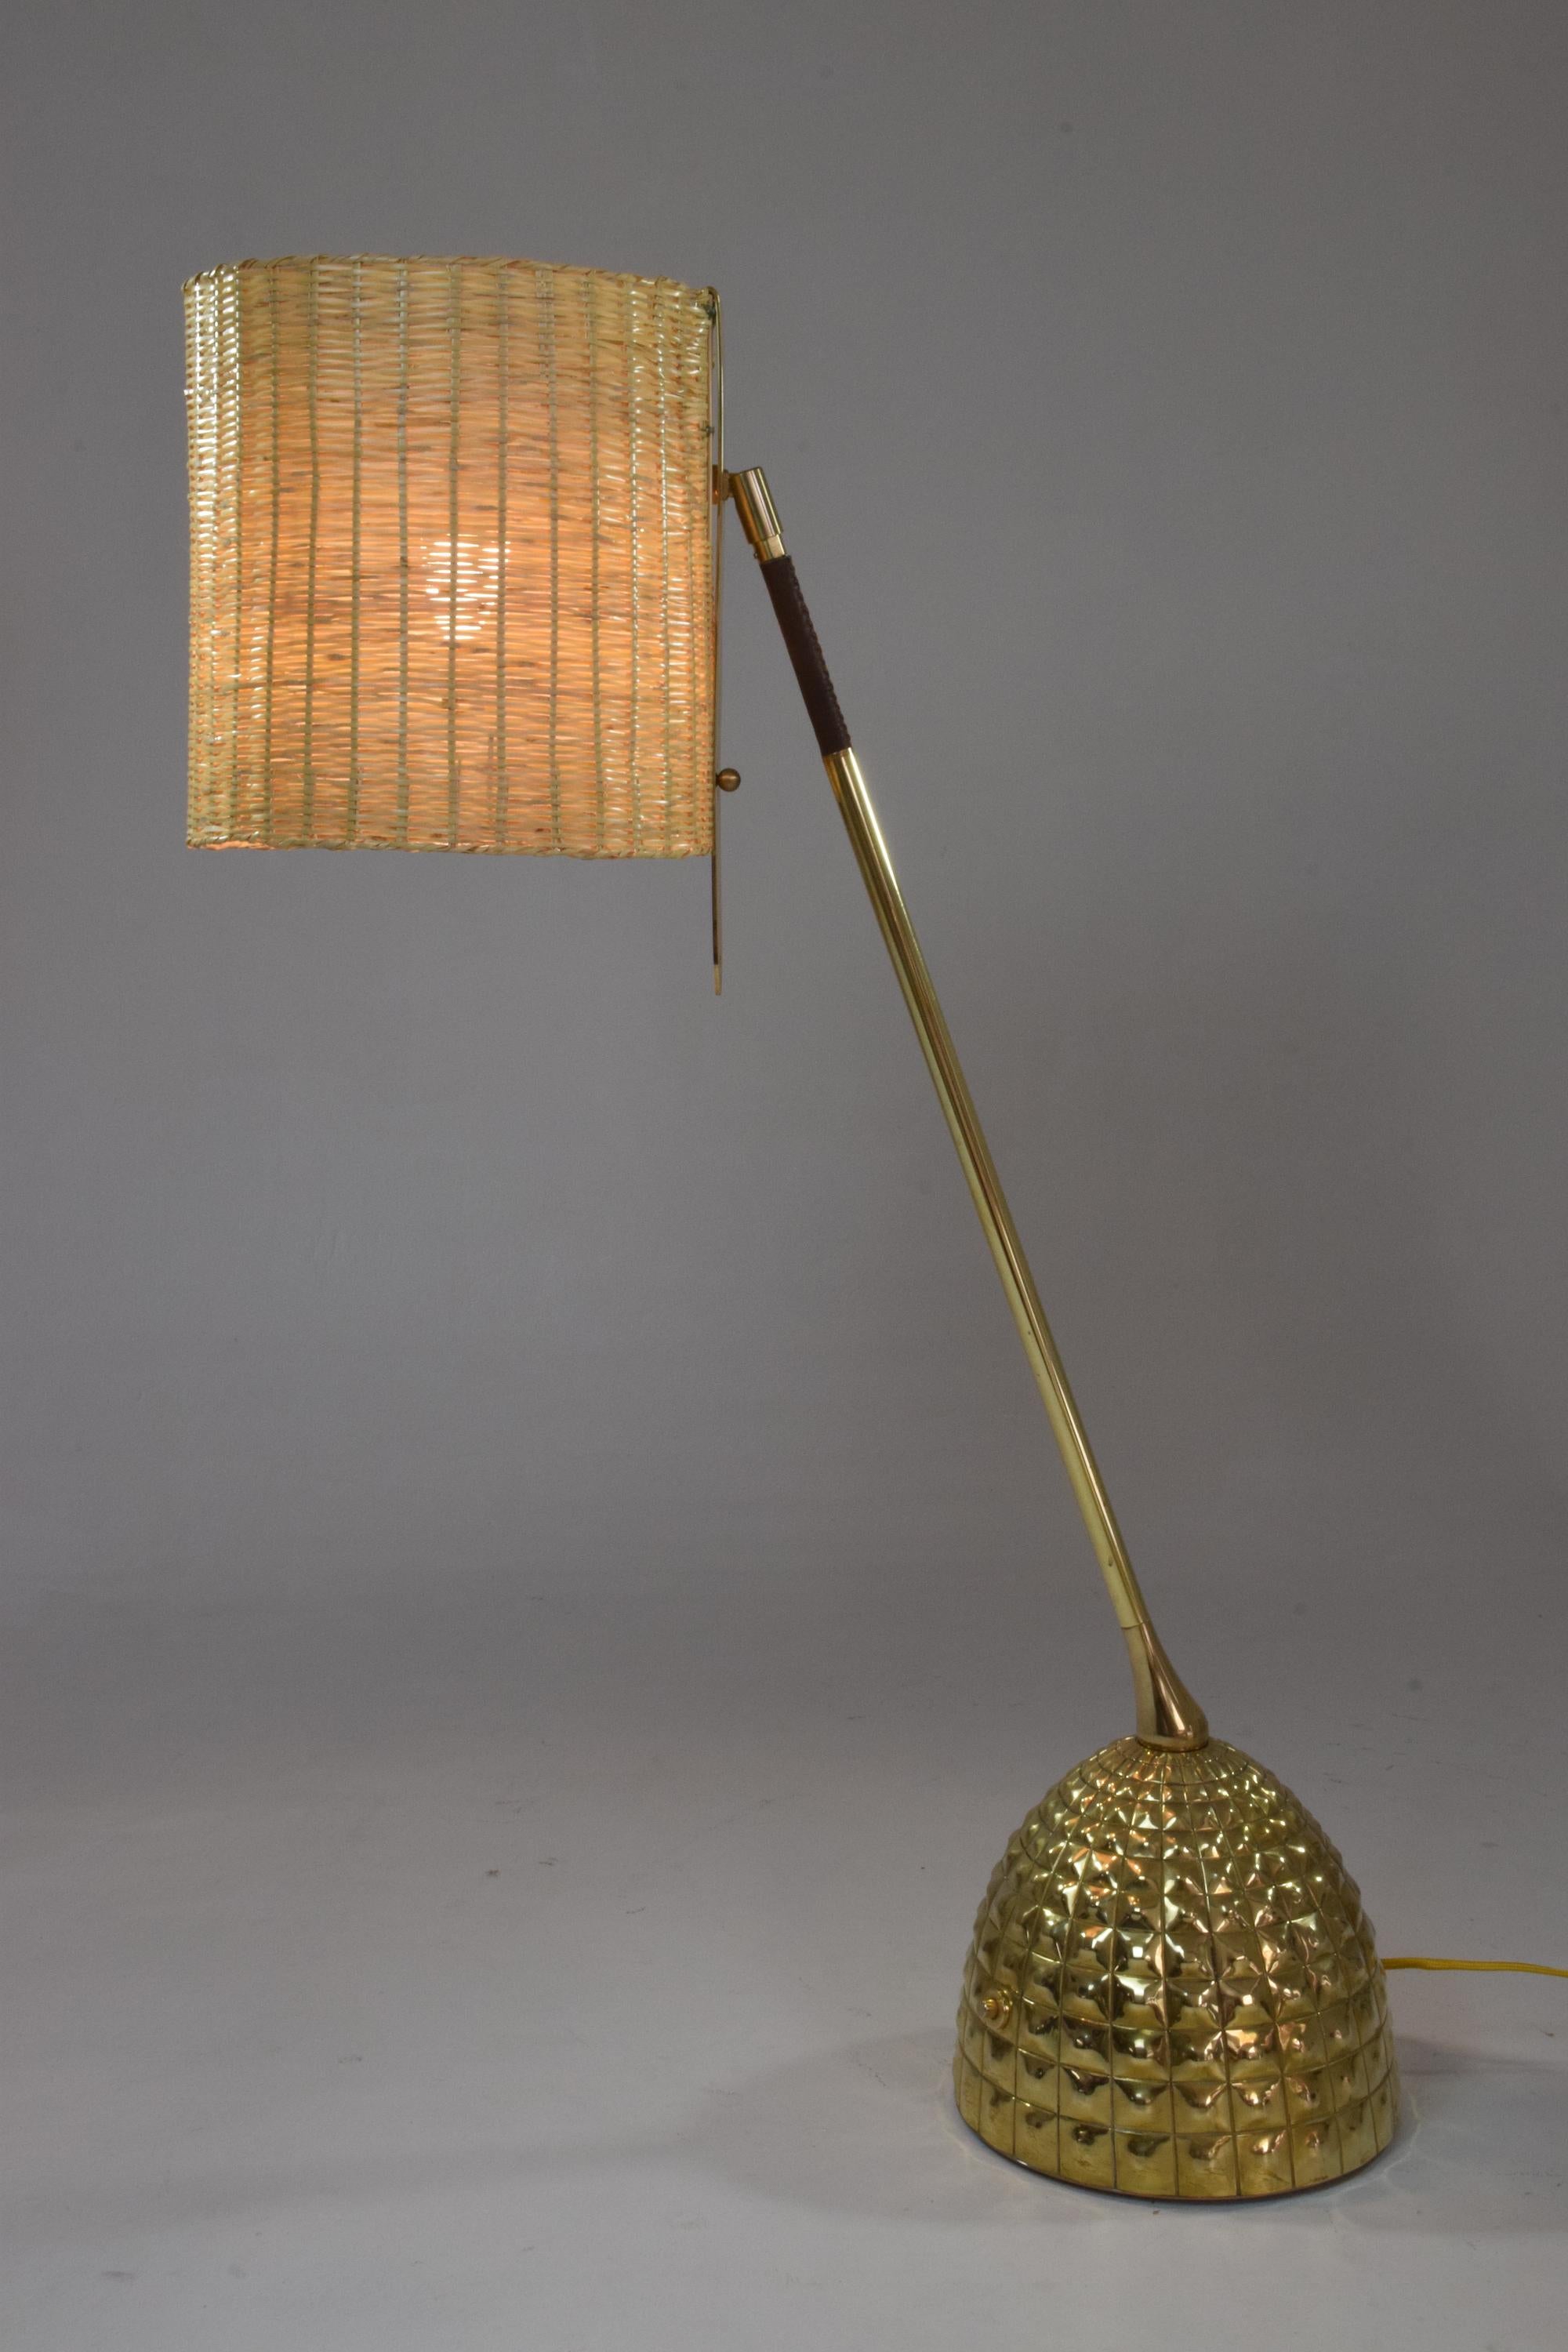 Contemporary handcrafted articulating table lamp pictured in a polished solid brass finish, adorned with a brown hand sewn sheathed leather detail by artisan saddle makers and a hand embellished base. The lamp is designed with our signature pear